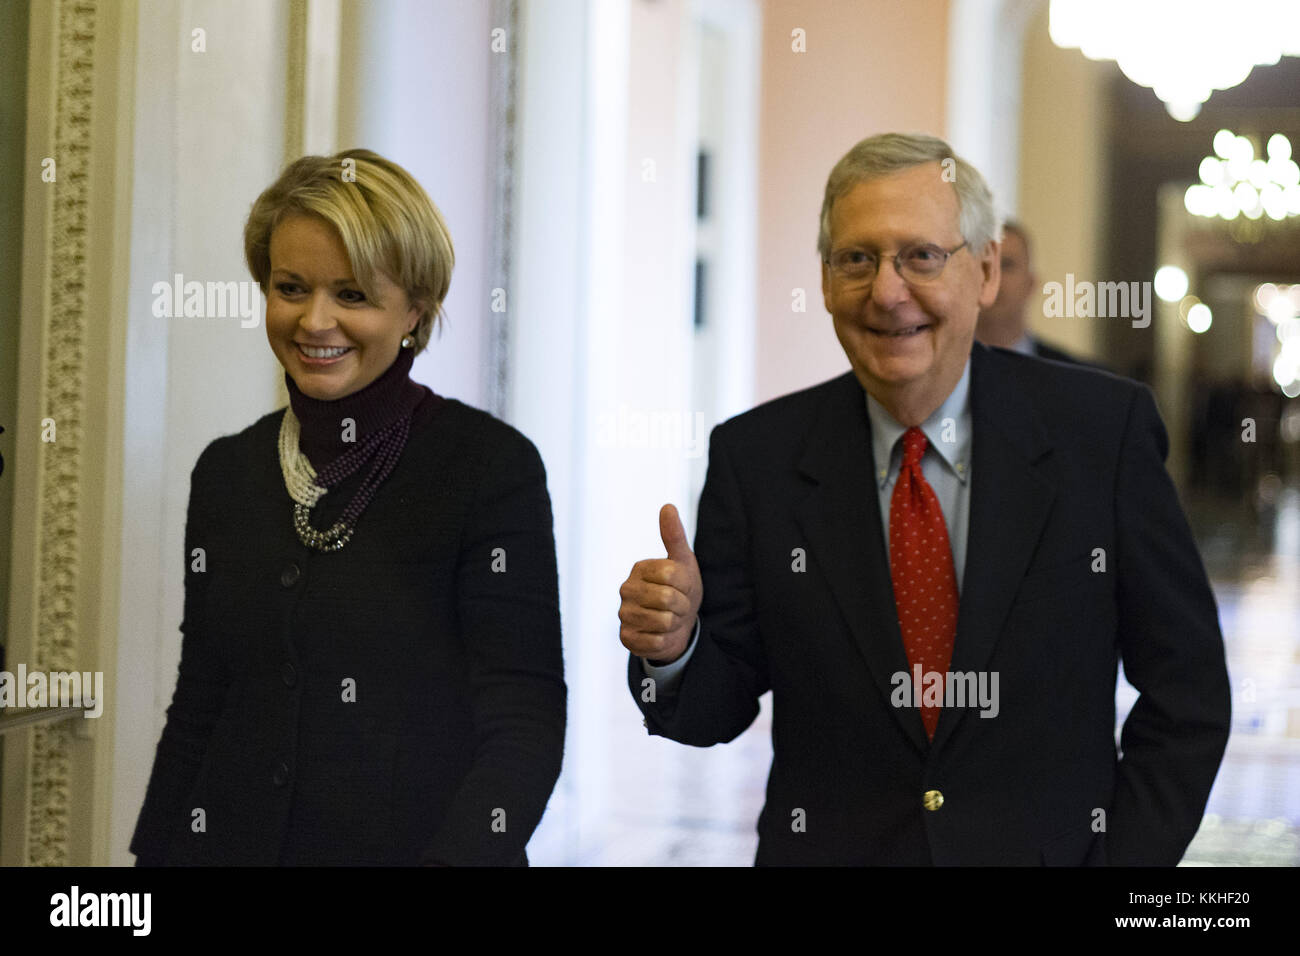 Washington, District of Columbia, USA. 1st Dec, 2017. United States Senate Majority Leader Mitch McConnell (Republican of Kentucky) gives a thumbs up as he walks with a staffer from his office to the Senate chamber for a procedural vote to move forward with voting on the Republican proposed tax reform bill at the United States Capitol in Washington, DC on Friday, December 1, 2017.Credit: Alex Edelman/CNP Credit: Alex Edelman/CNP/ZUMA Wire/Alamy Live News Stock Photo